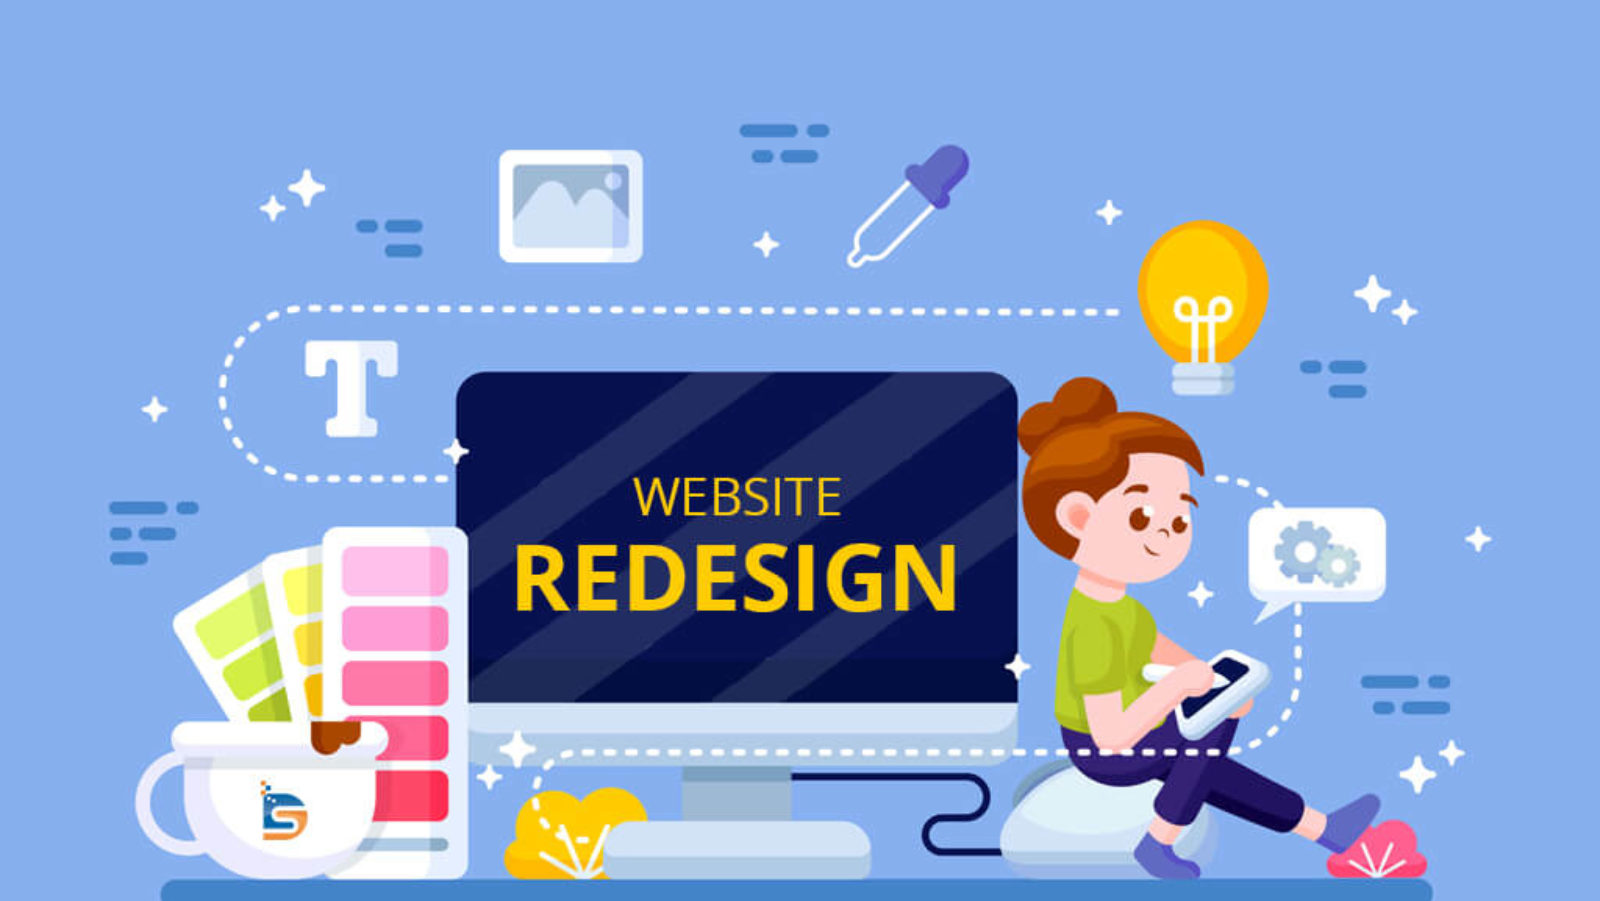 Get The Most From Your Website Redesign